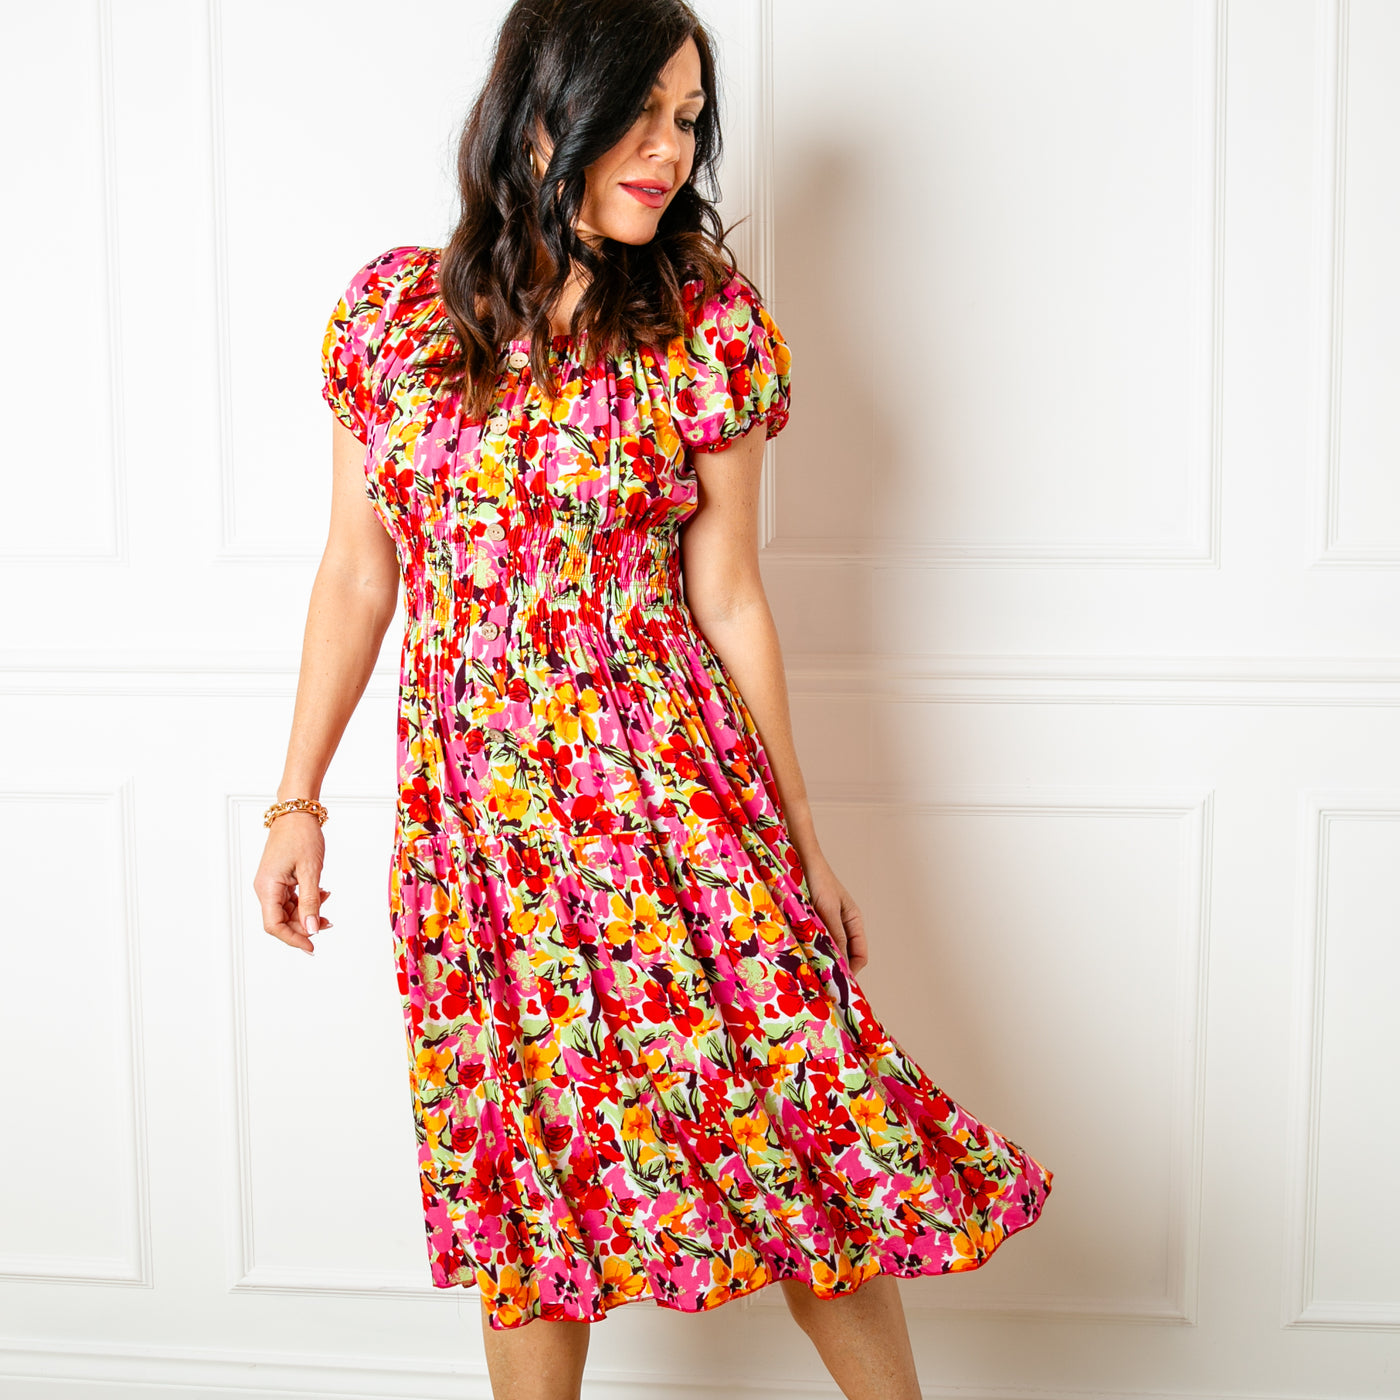 The floral red Printed Button Midi Dress with short puffy sleeves that are elasticated around the cuff